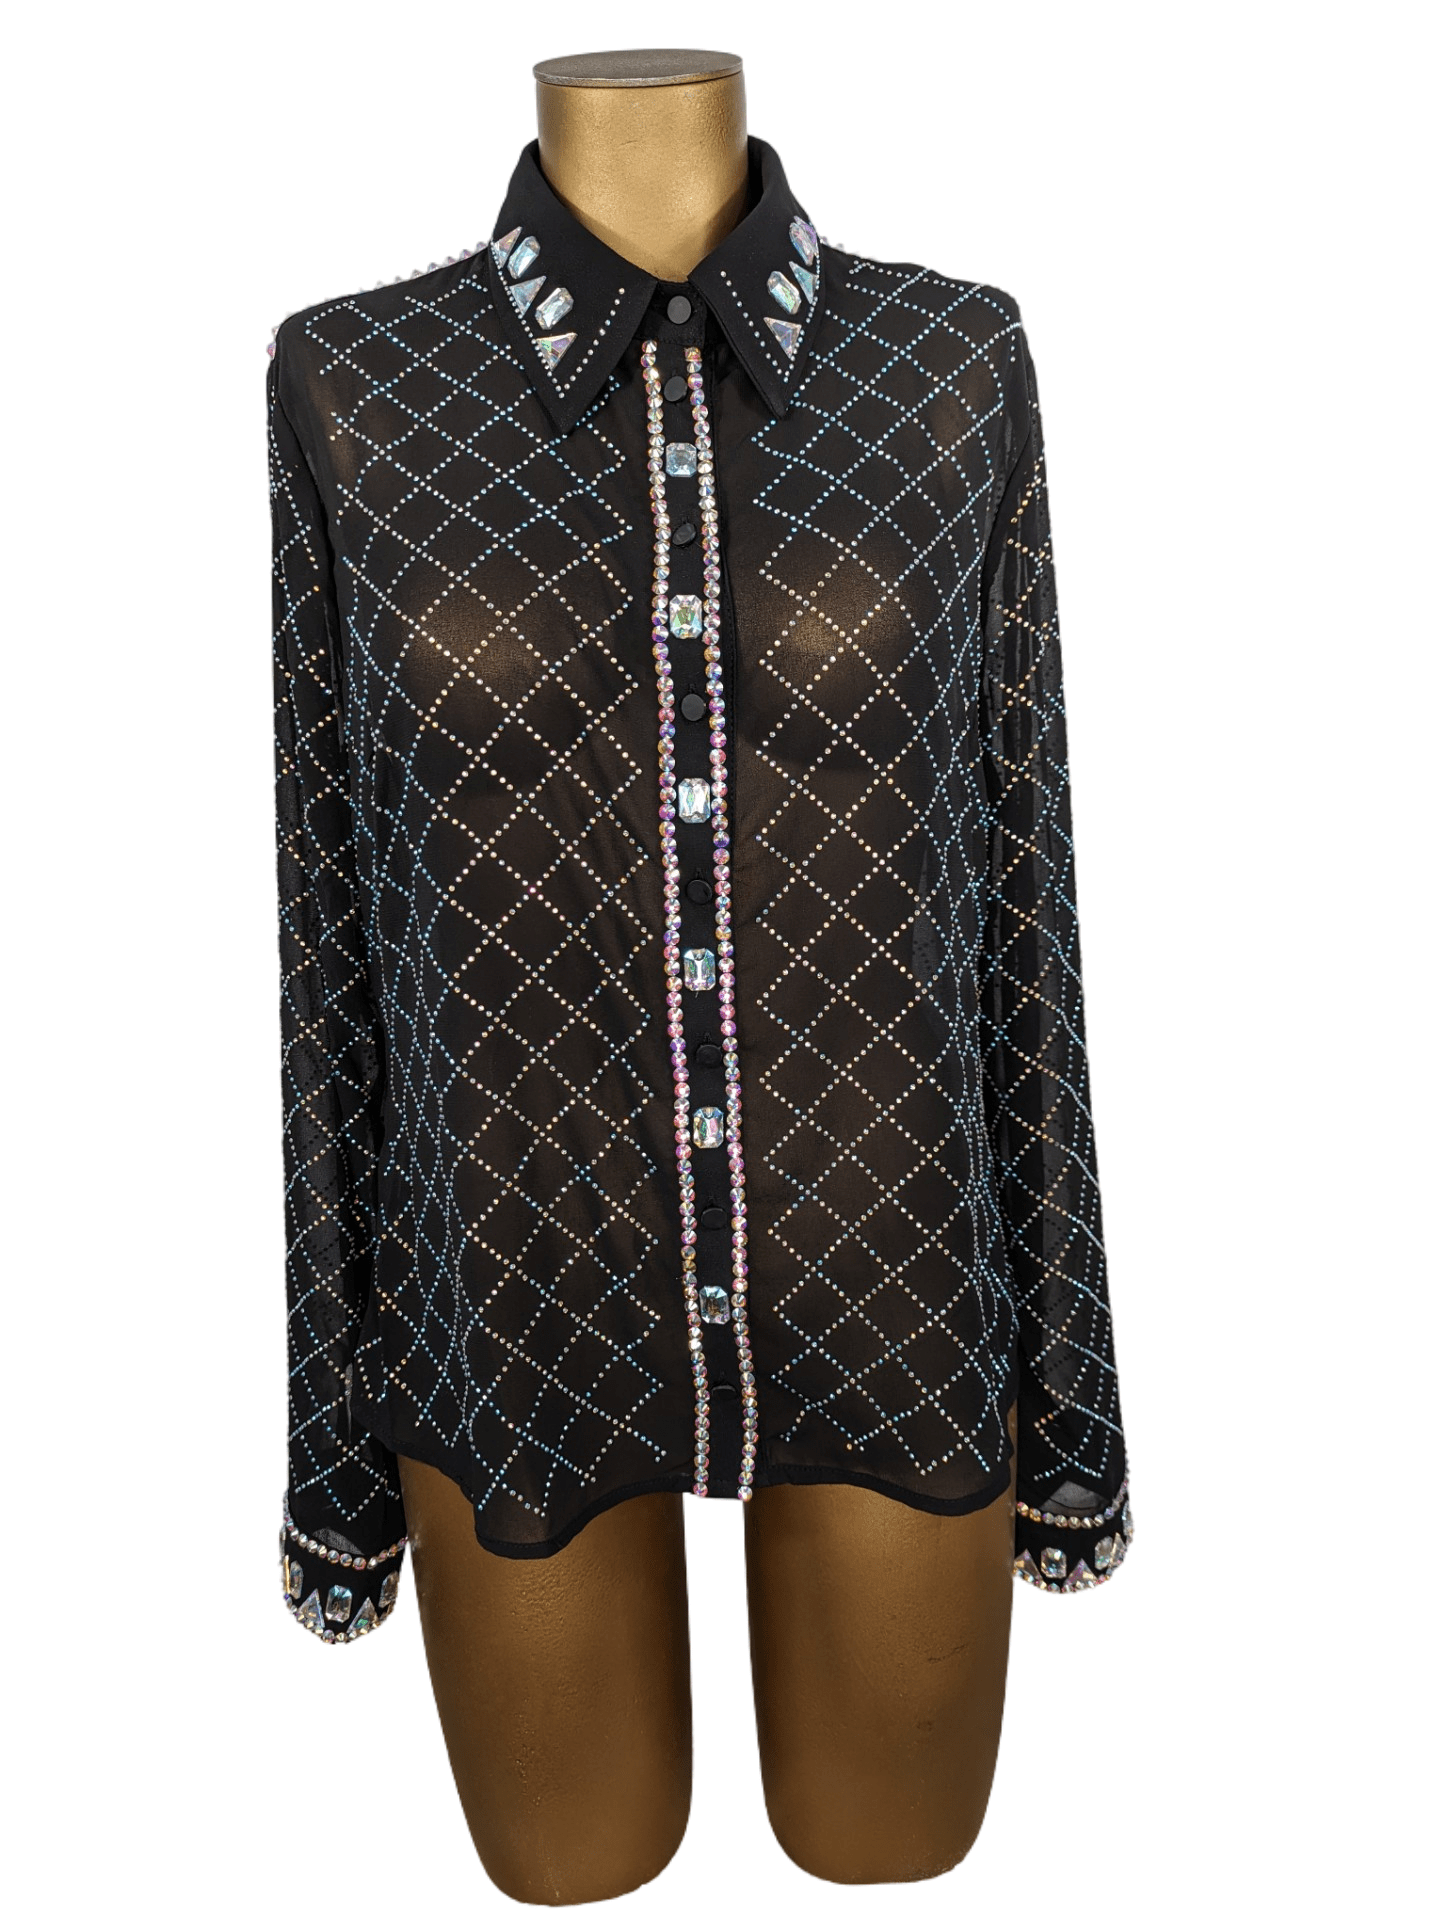 sparkle-ridge-womens-western-wear-affordable-show-clothes-horse-shirts-with-bling-rodeo-bodysuit-black-diamond-glitz-front.png (Copy) (Copy)